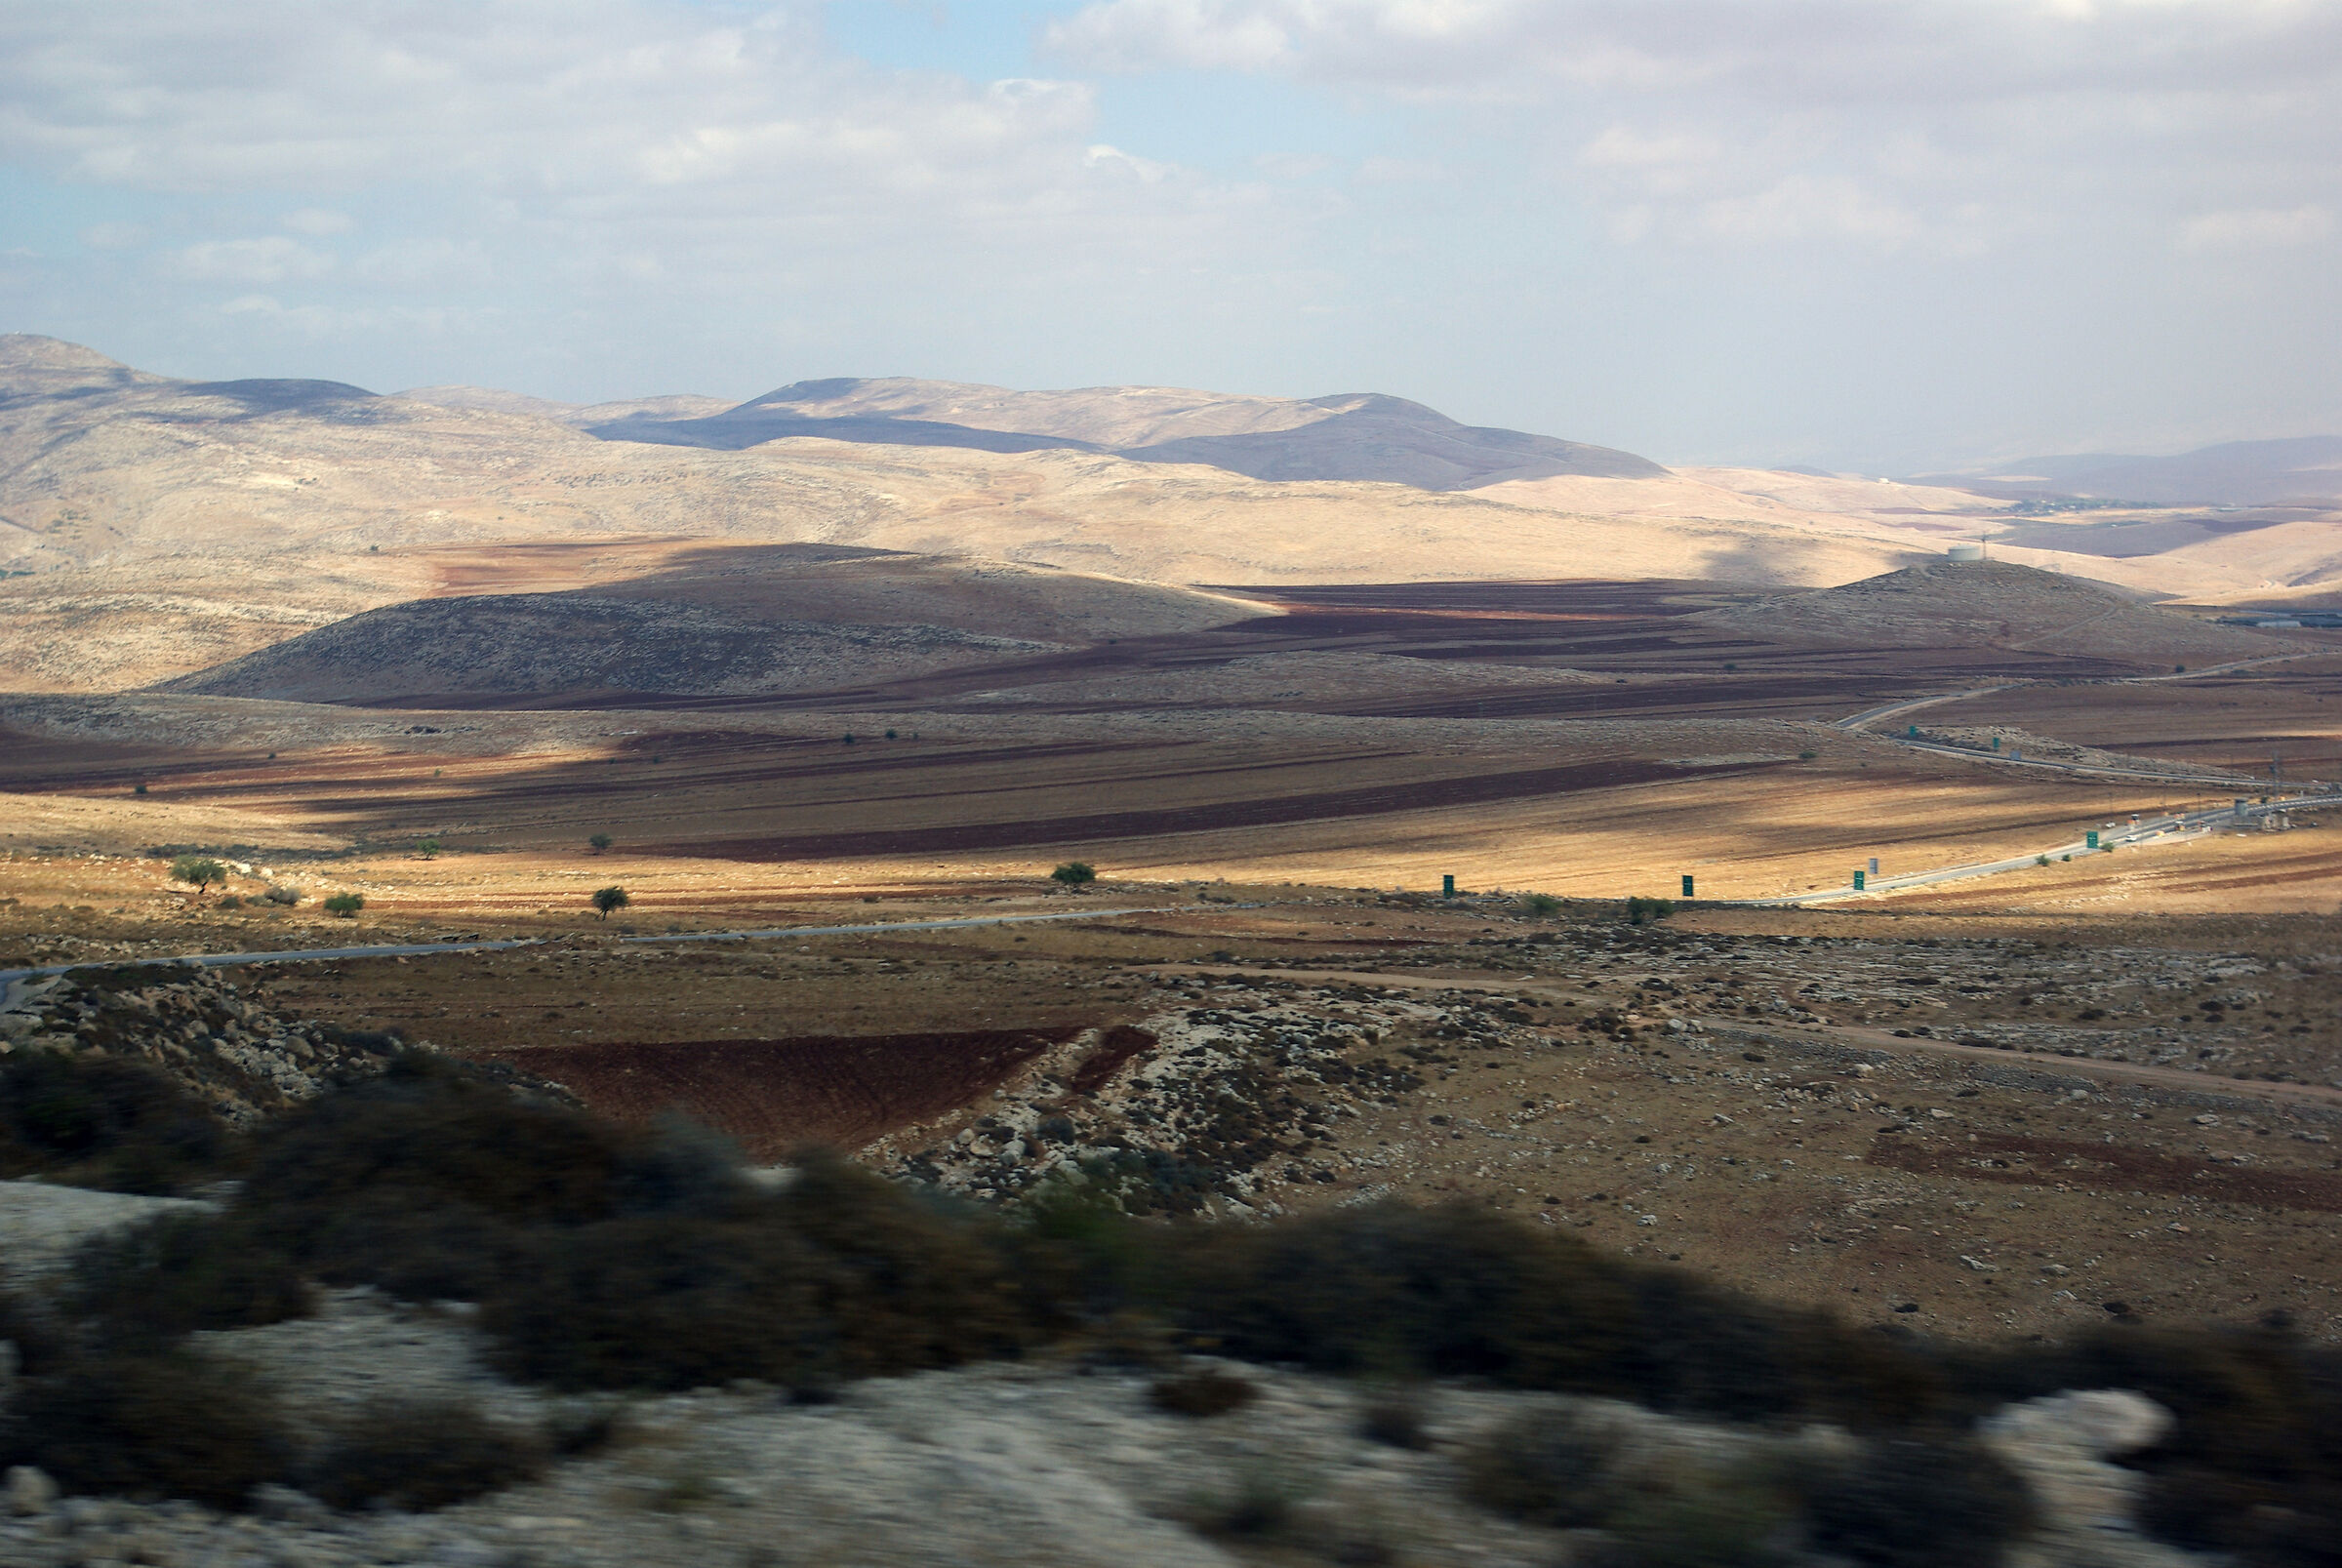 Travelling between Nablus and Bethany...